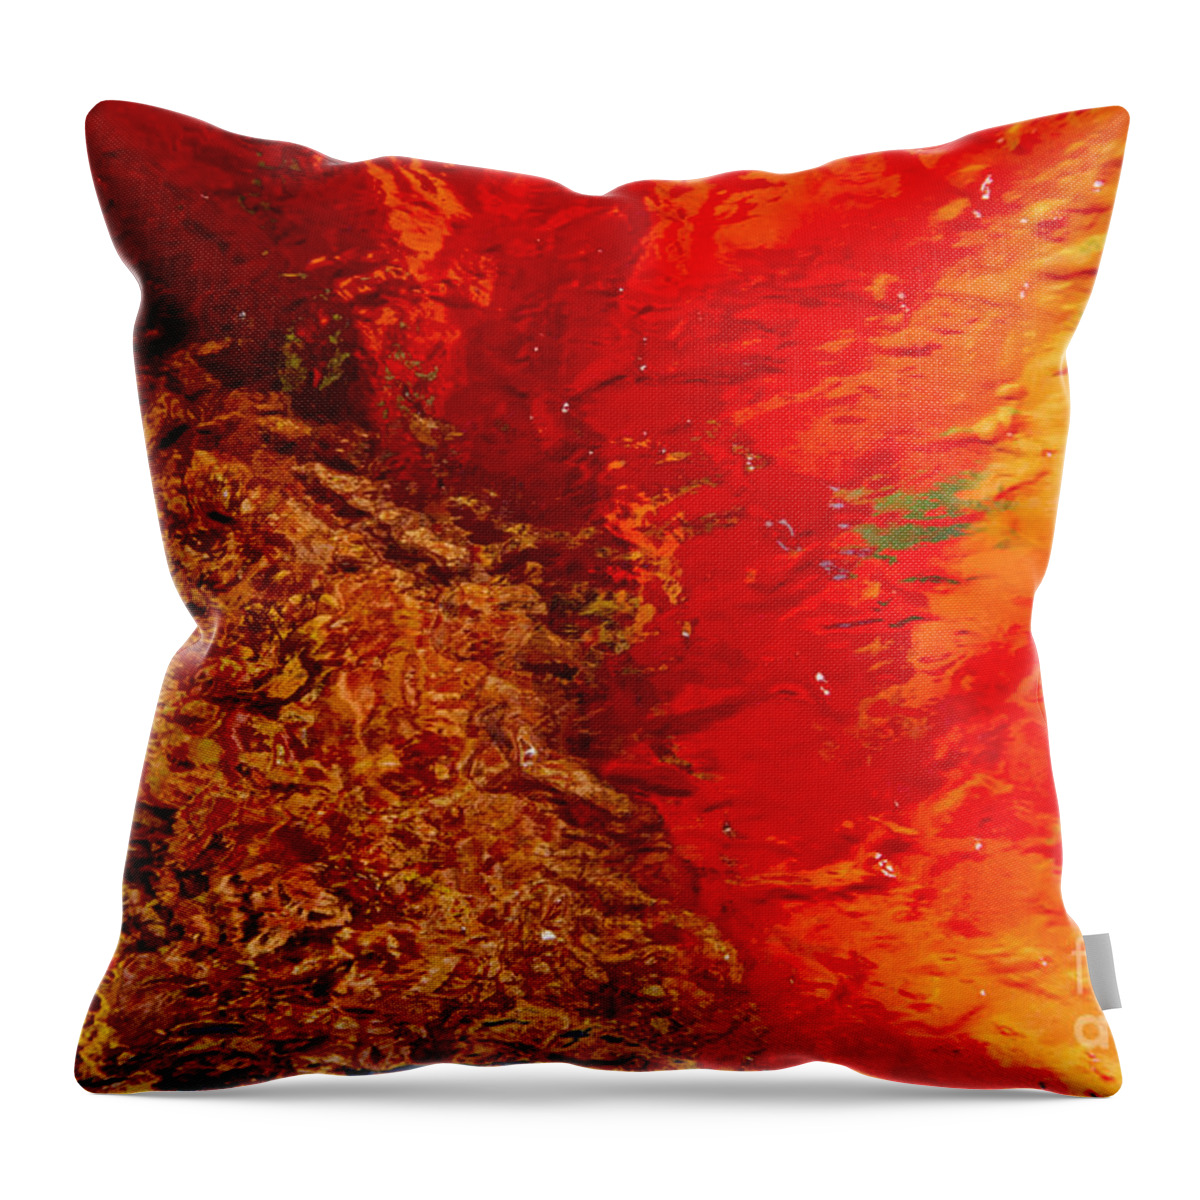 Sunflower Throw Pillow featuring the photograph Sunflower Impressions by Jeanette French